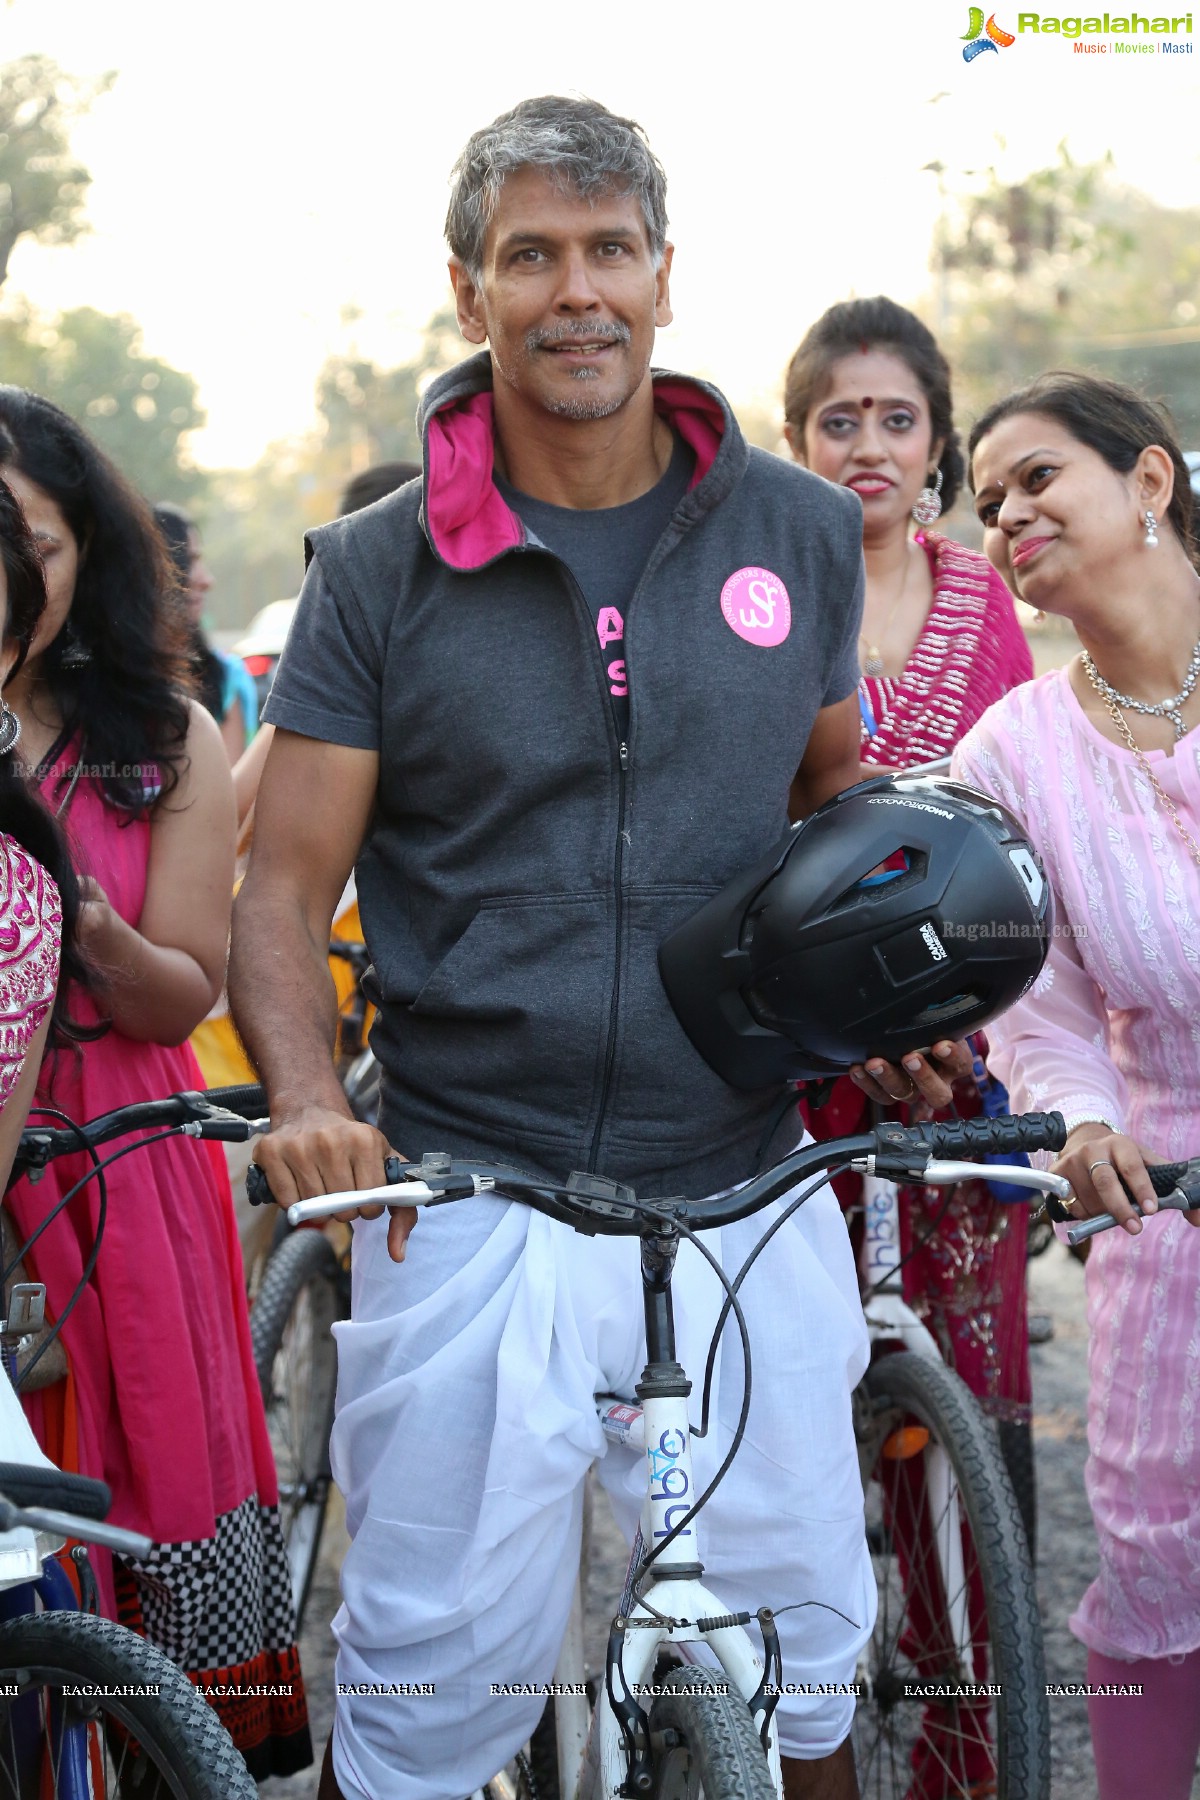 Pinkathon - A Cycle Rally with Milind at Hyderabad Bicycling Club, Hyderabad